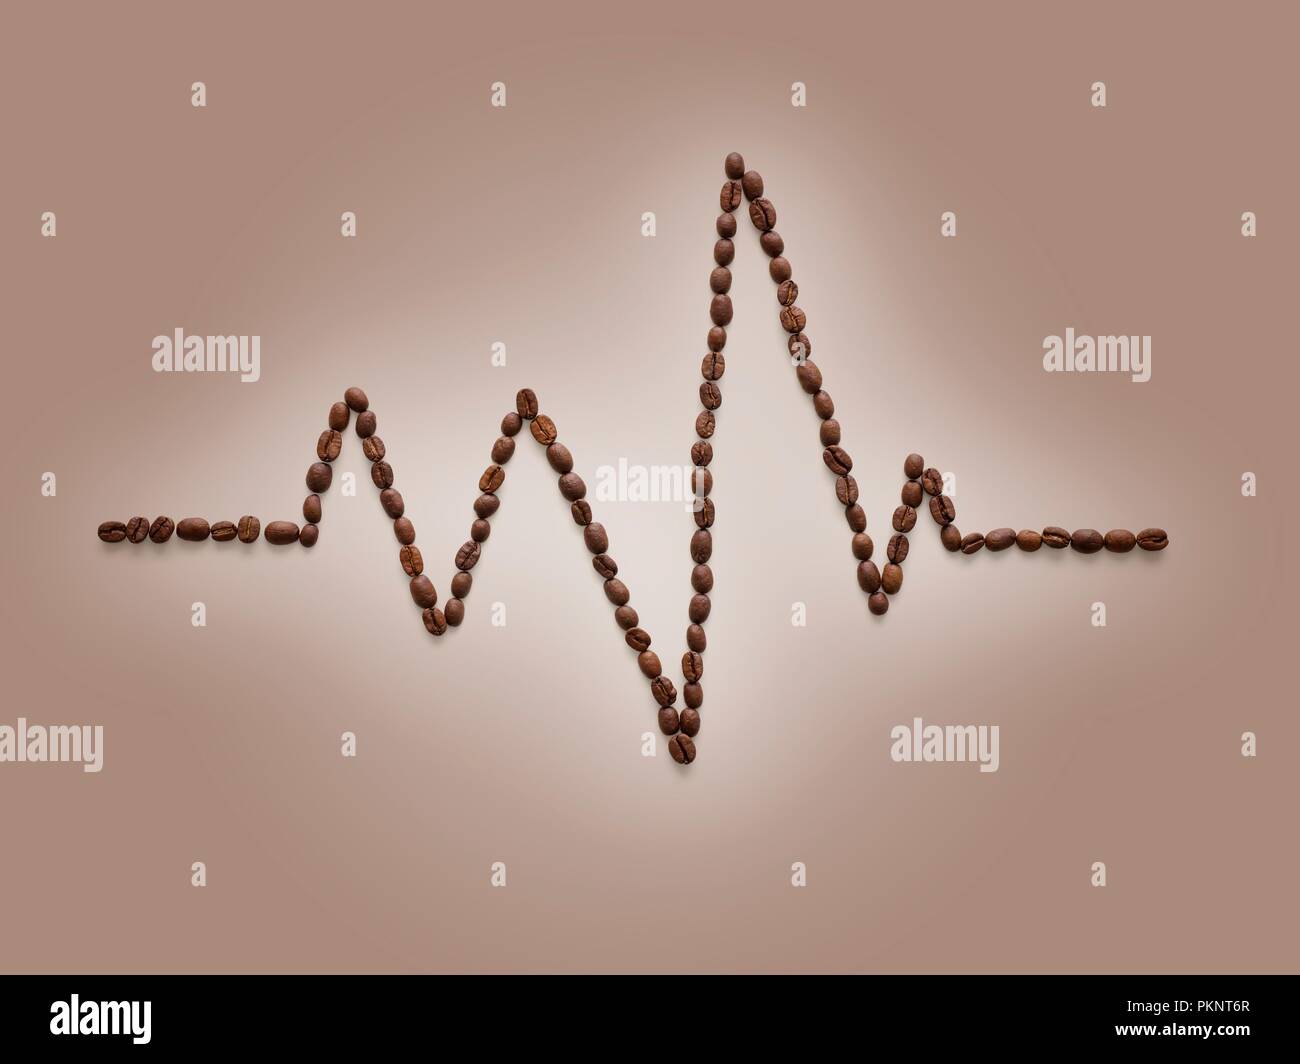 Coffee beans making an electrocardiogram line. Stock Photo